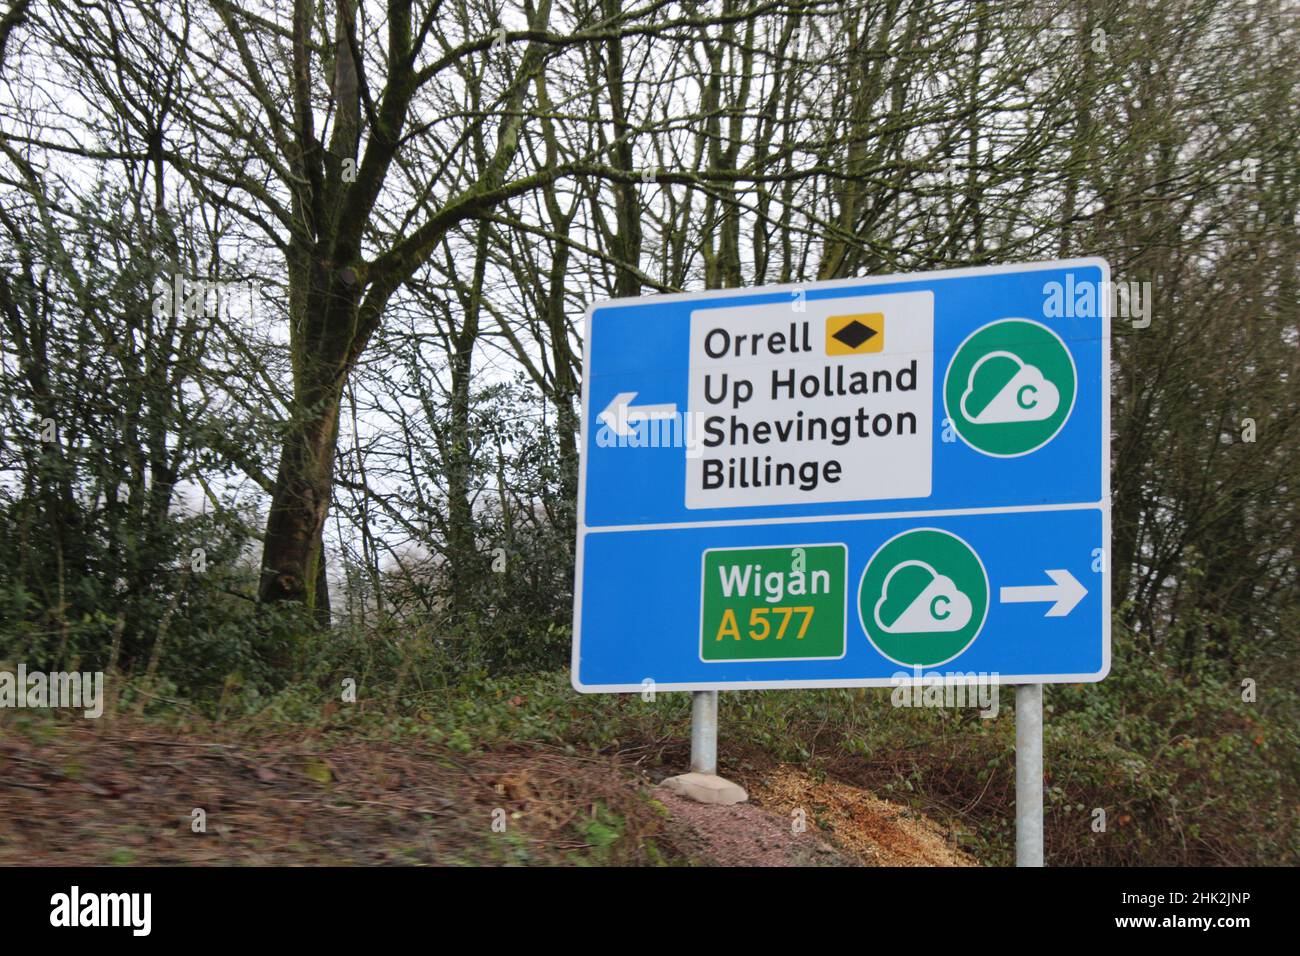 Clean air one sign with white arrows pointing to Wigan A577 and Orrell, Up Holland, Shevington and Billinge Stock Photo